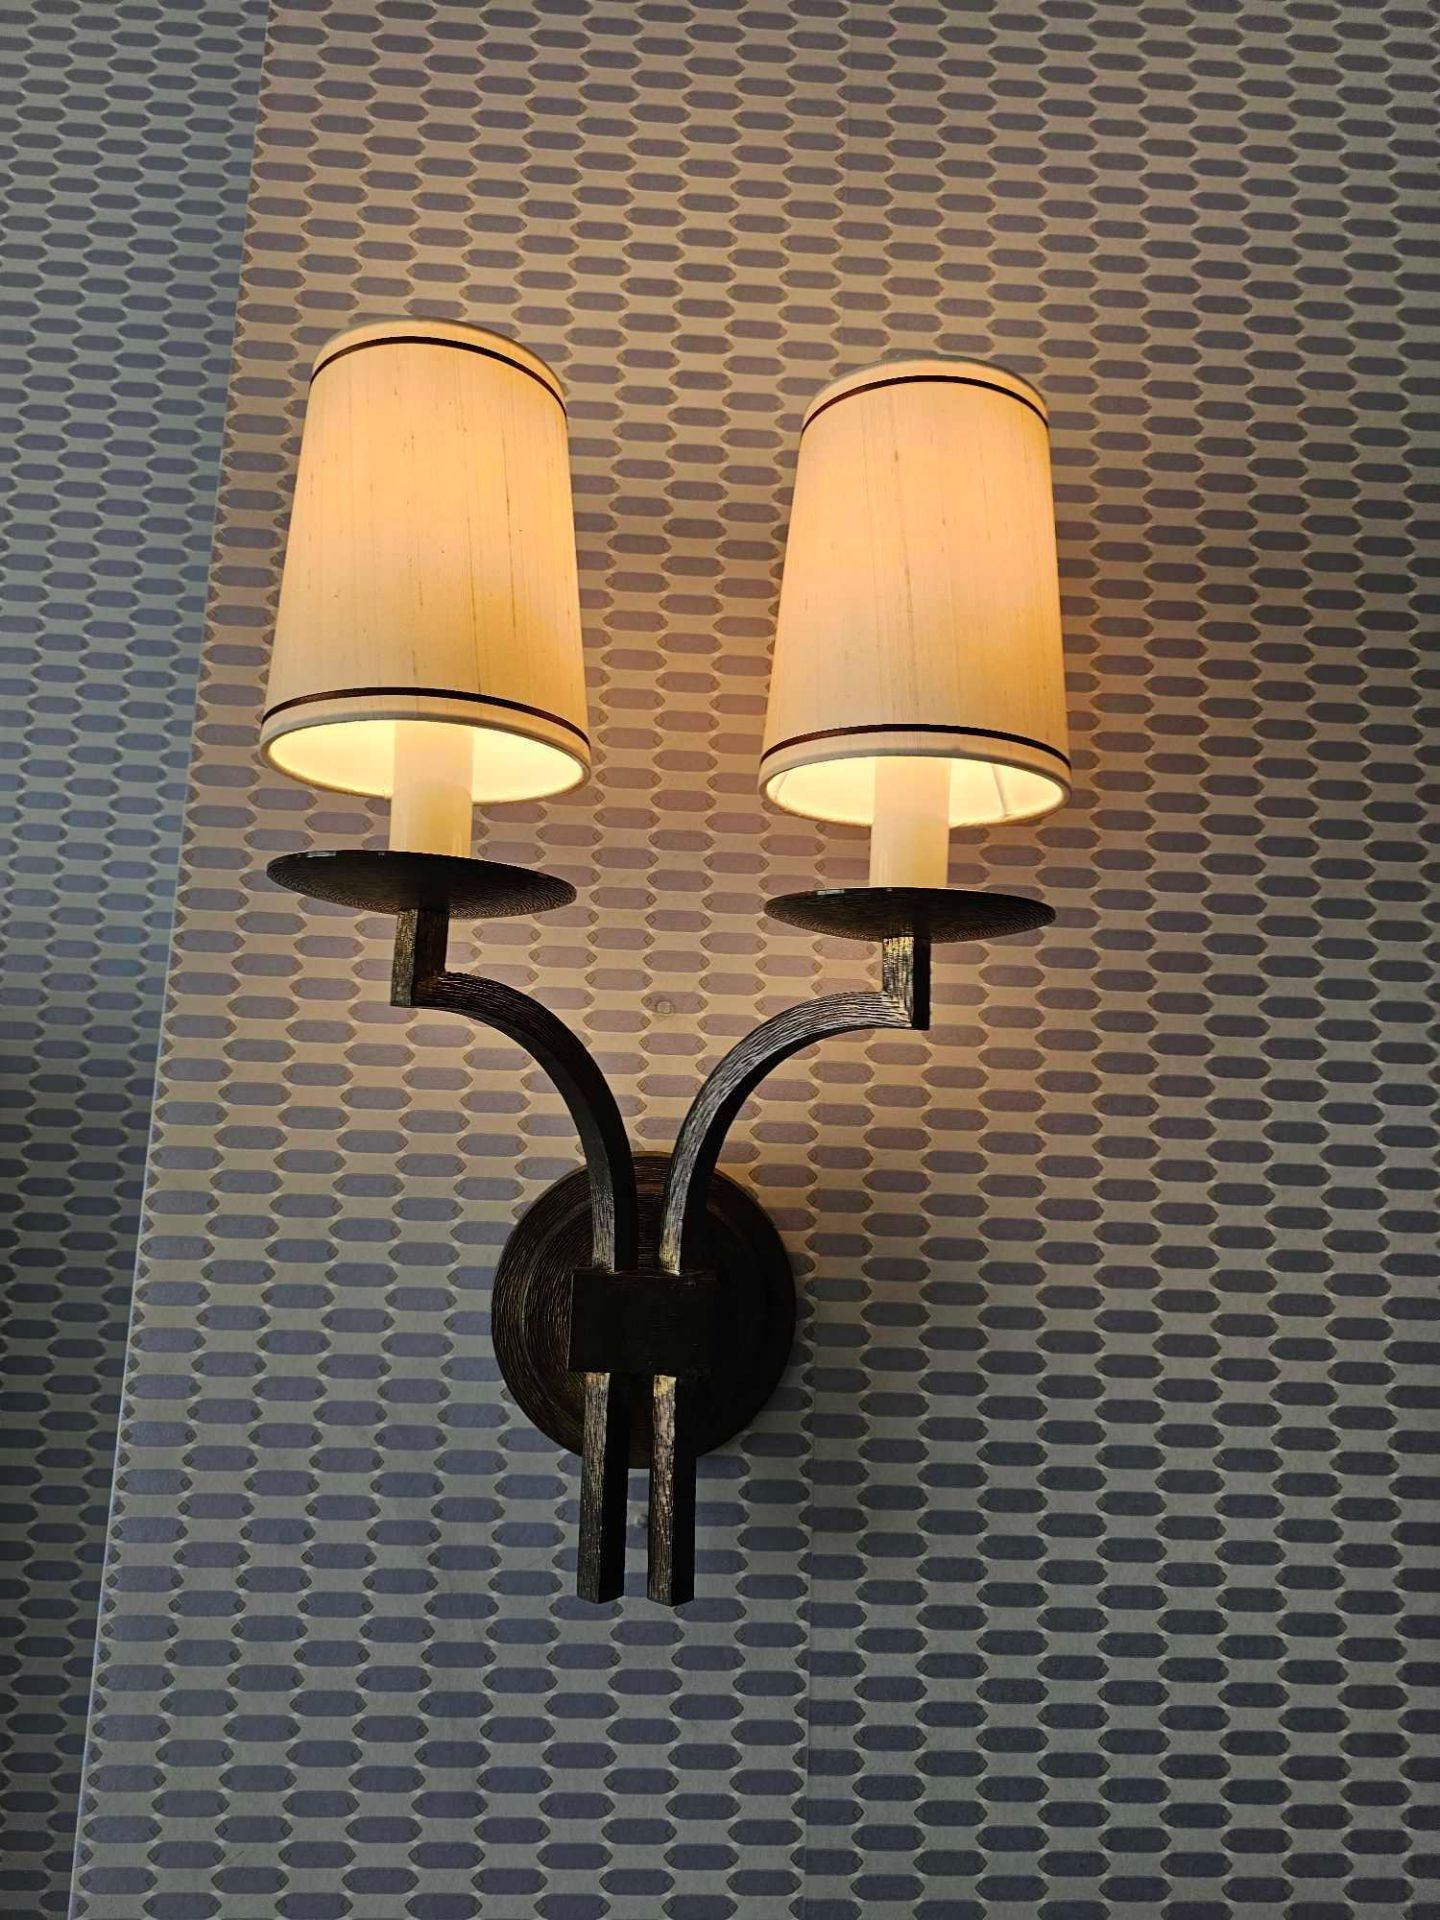 A Pair Of Dernier And Hamlyn Twin Arm Antique Bronzed Wall Sconces With Shade 51cm (Room 816) - Image 2 of 4